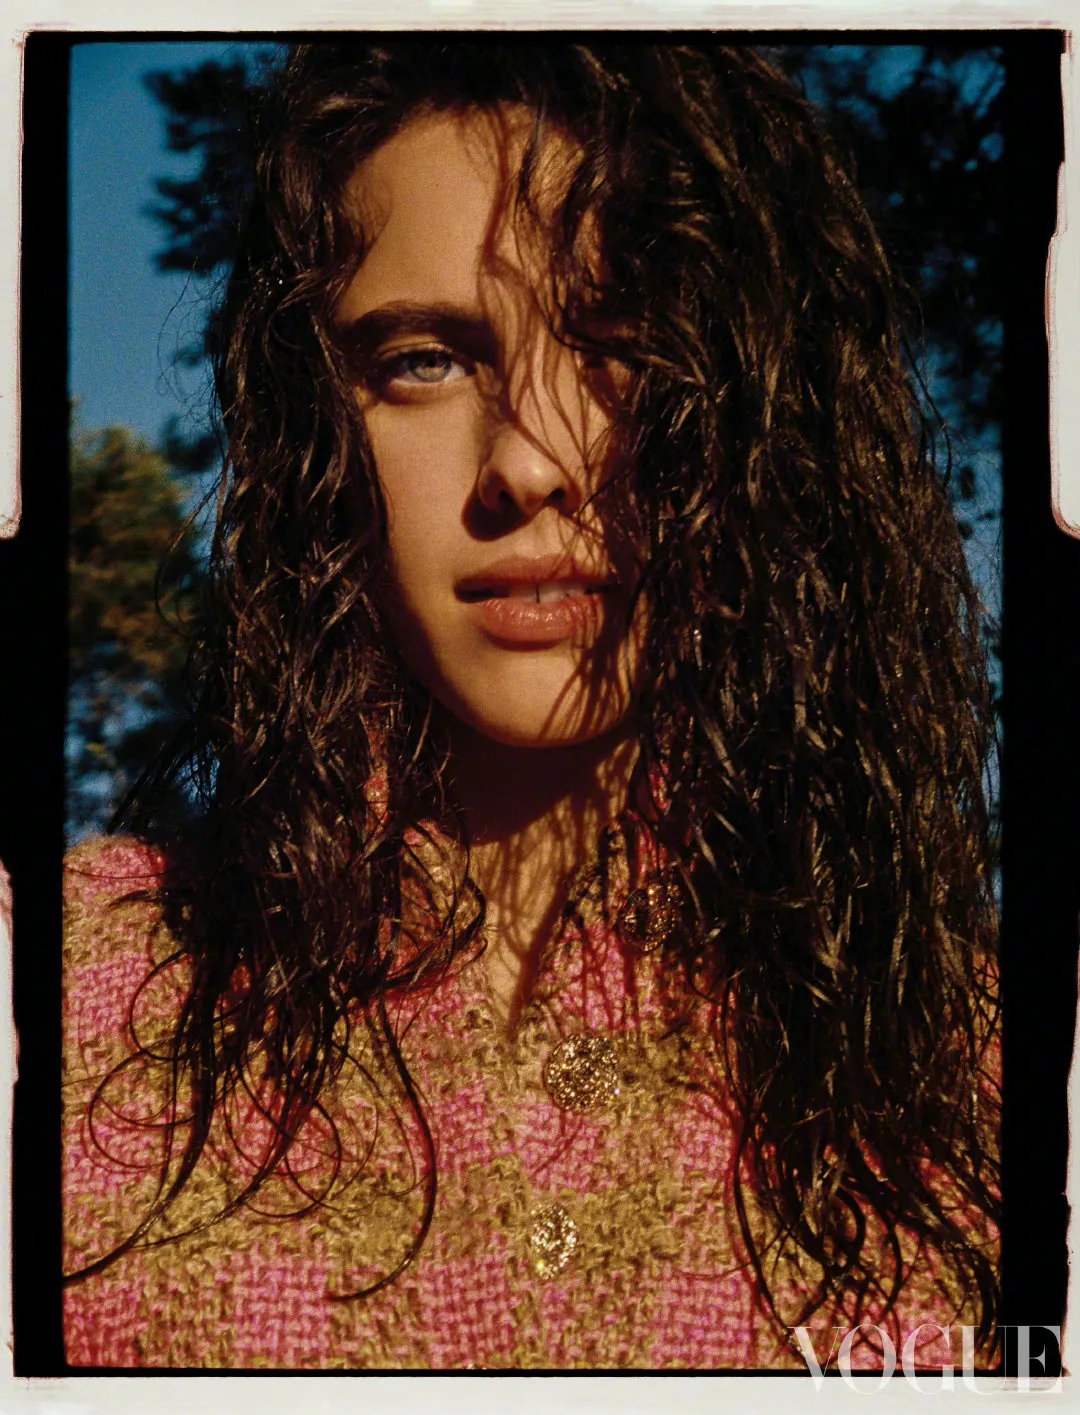 Margaret Qualley, new photo shoot for "PhotoVOGUE" | FMV6